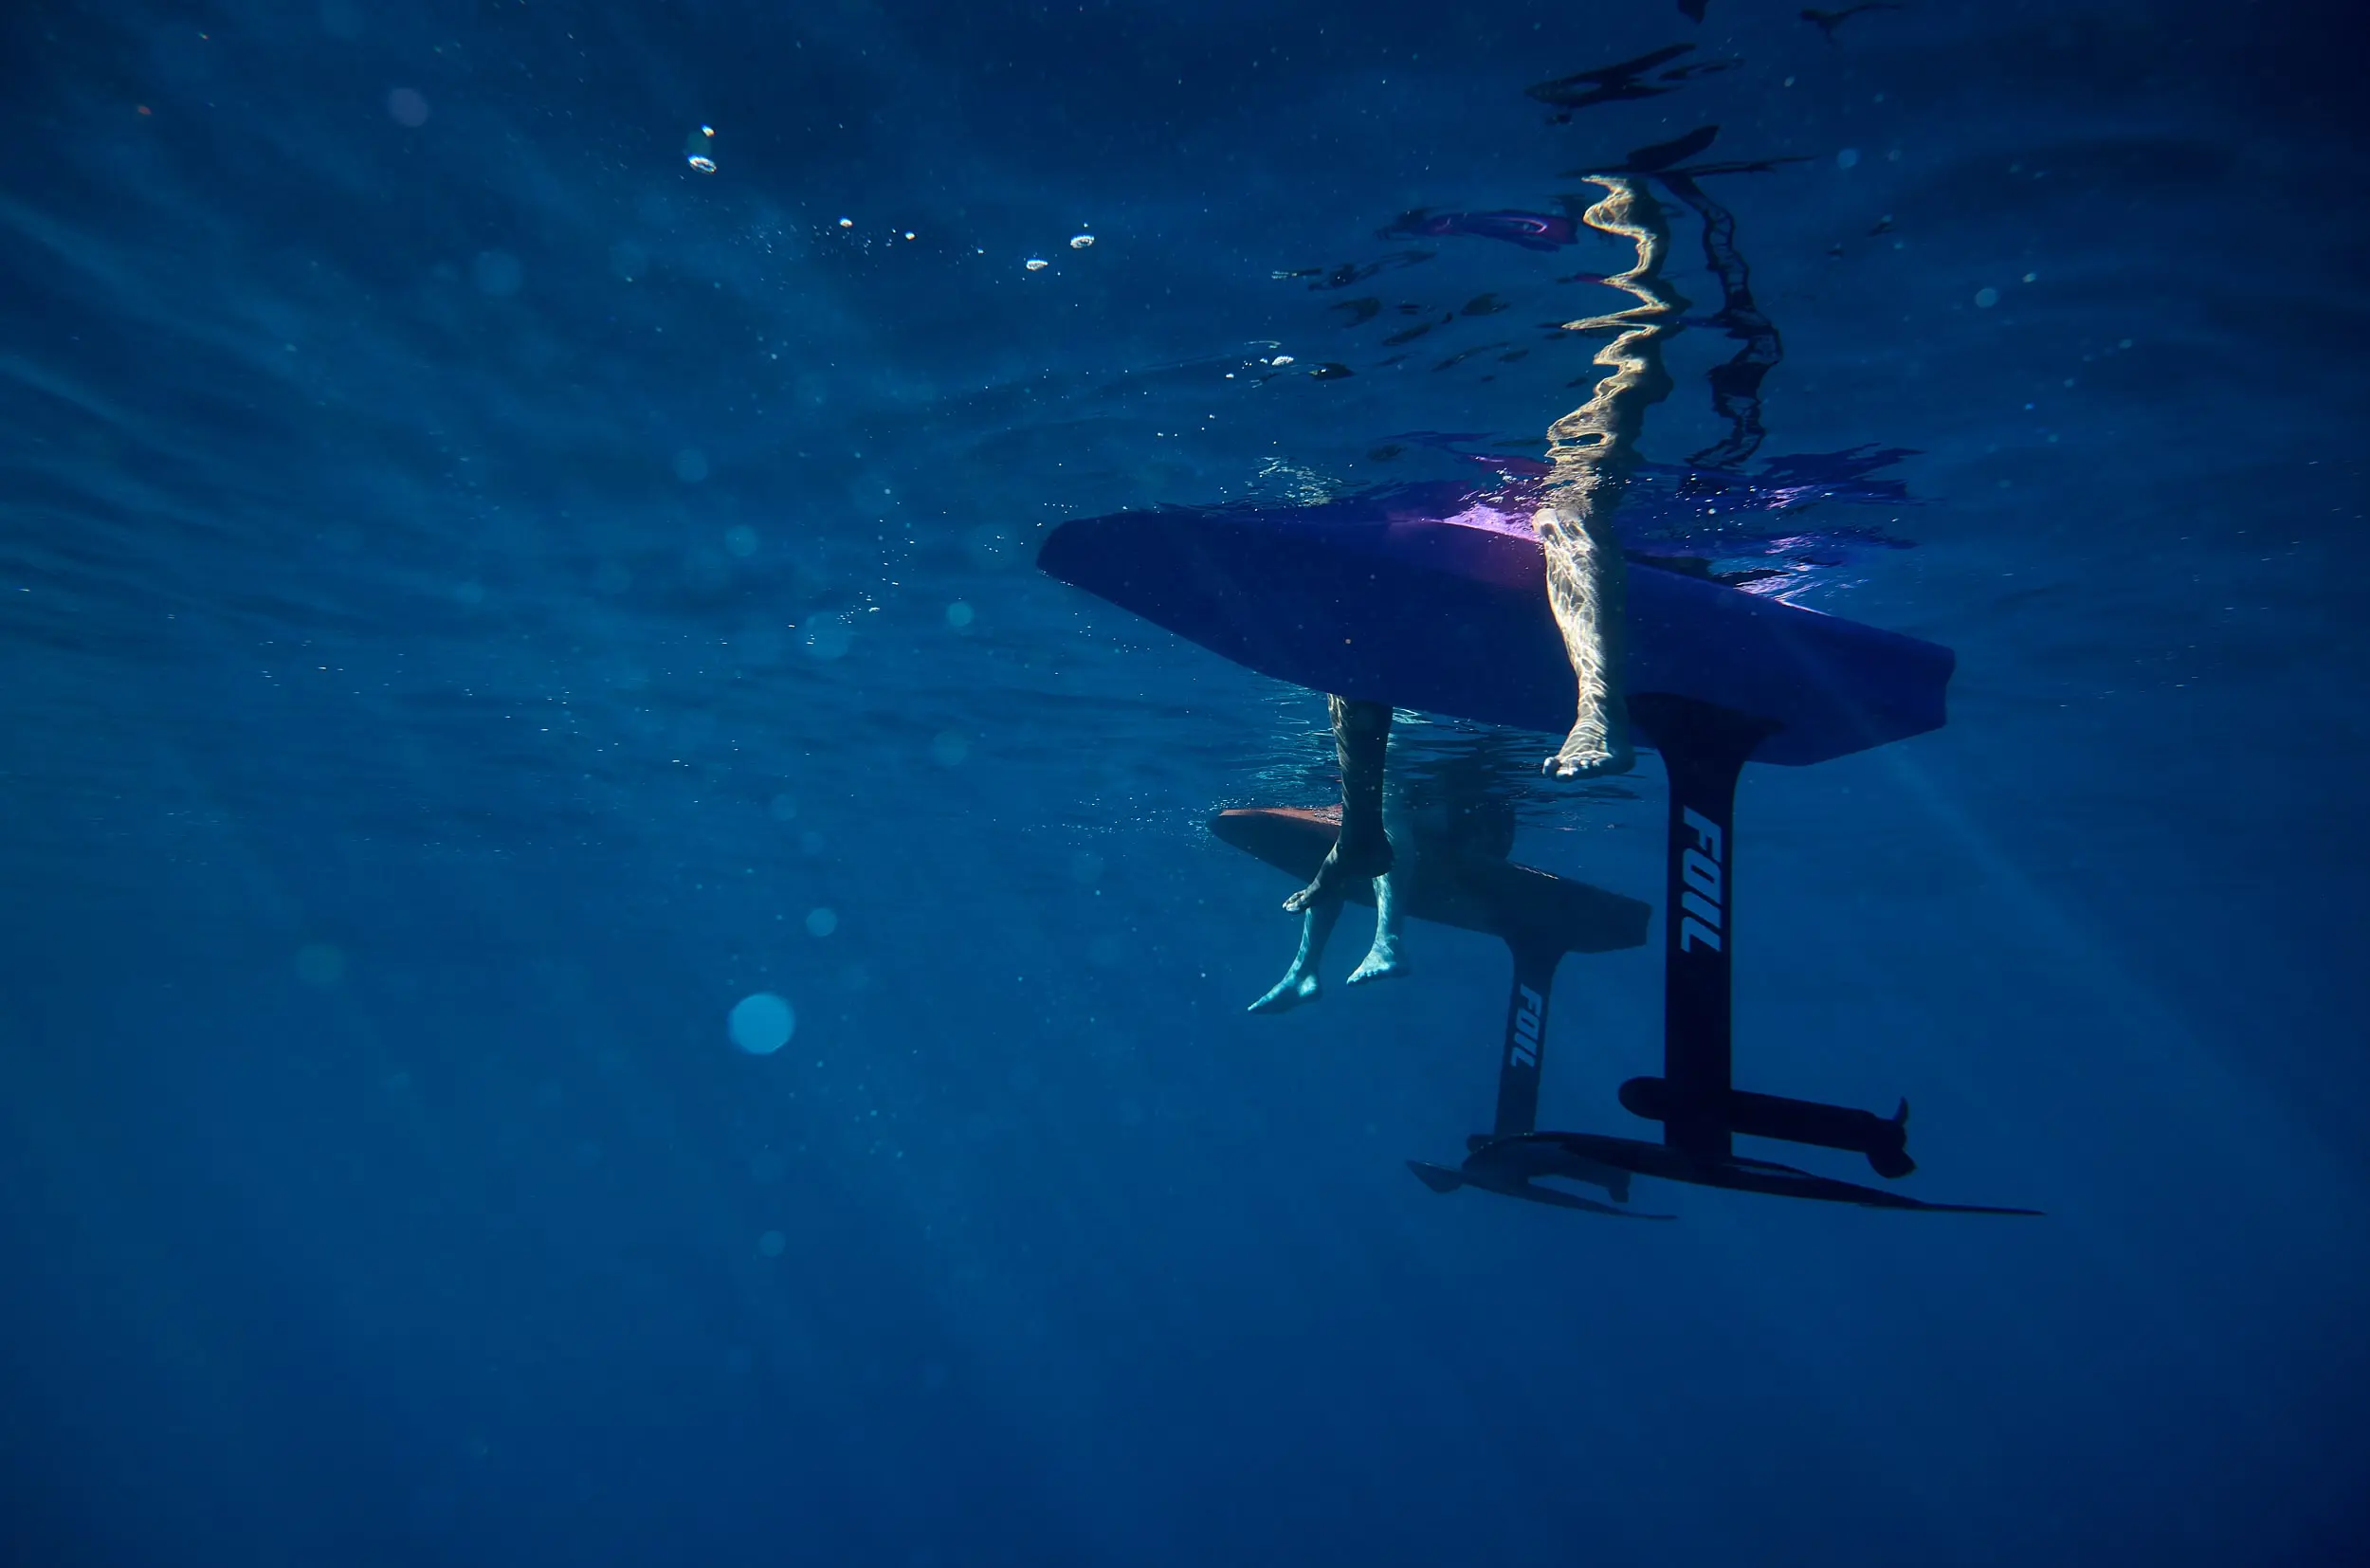 Underwater shot of two FOIL boards floating on the surface. The legs of two eFoil riders are positioned off the side of the board and sun rays are penetrating through the water’s surface.